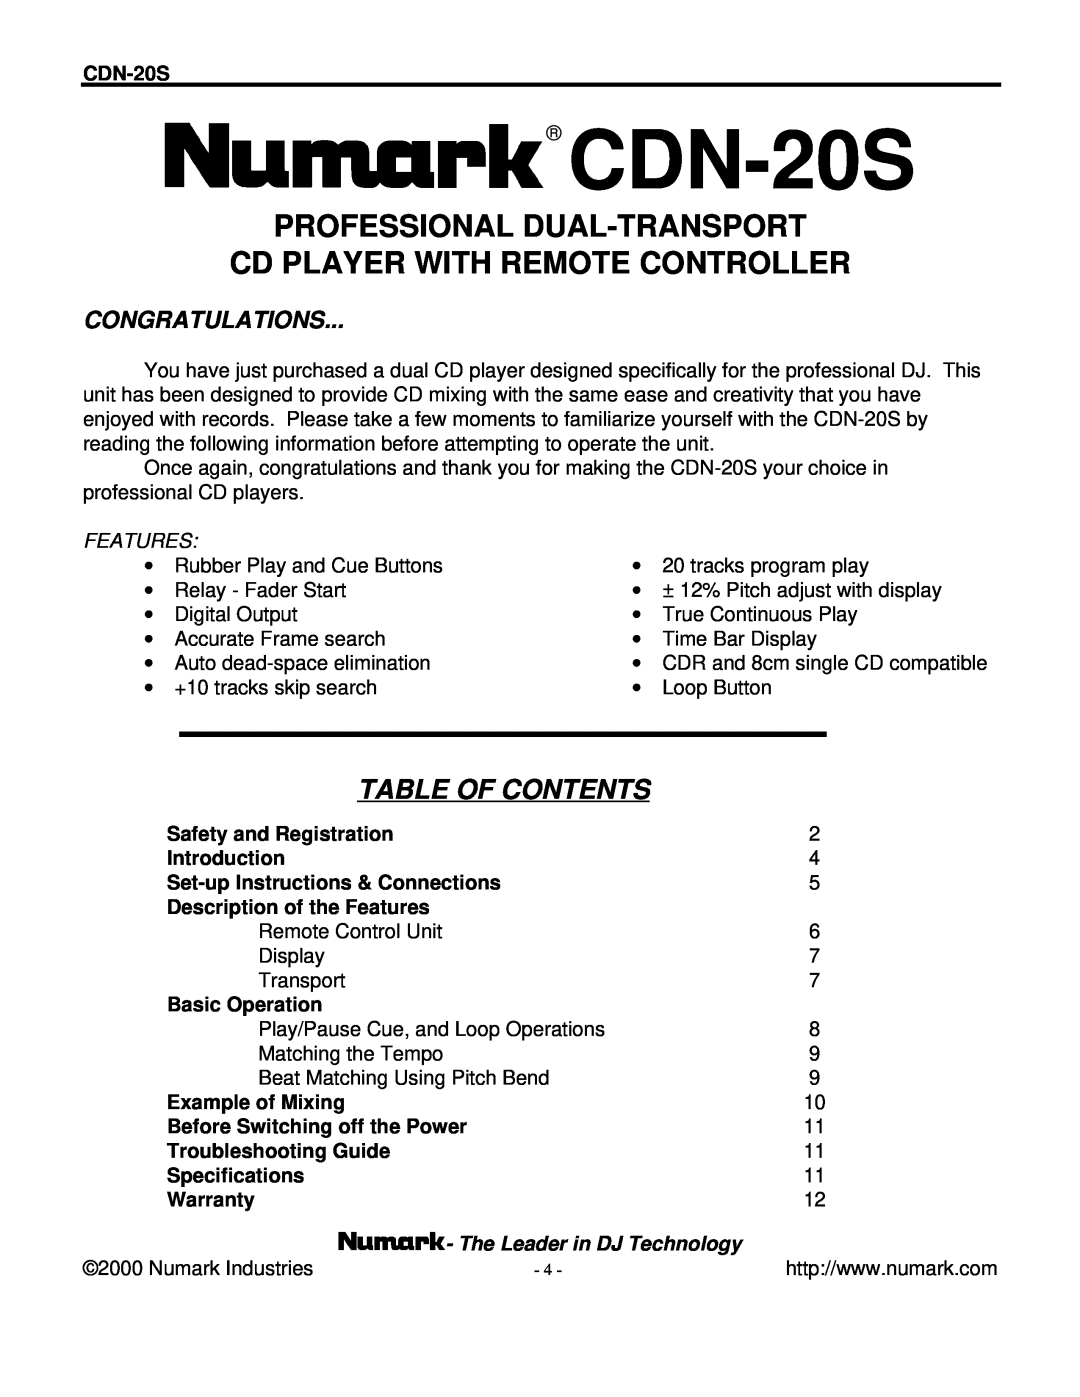 Numark Industries CDN-20S Table Of Contents, Congratulations, Professional Dual-Transport, The Leader in DJ Technology 